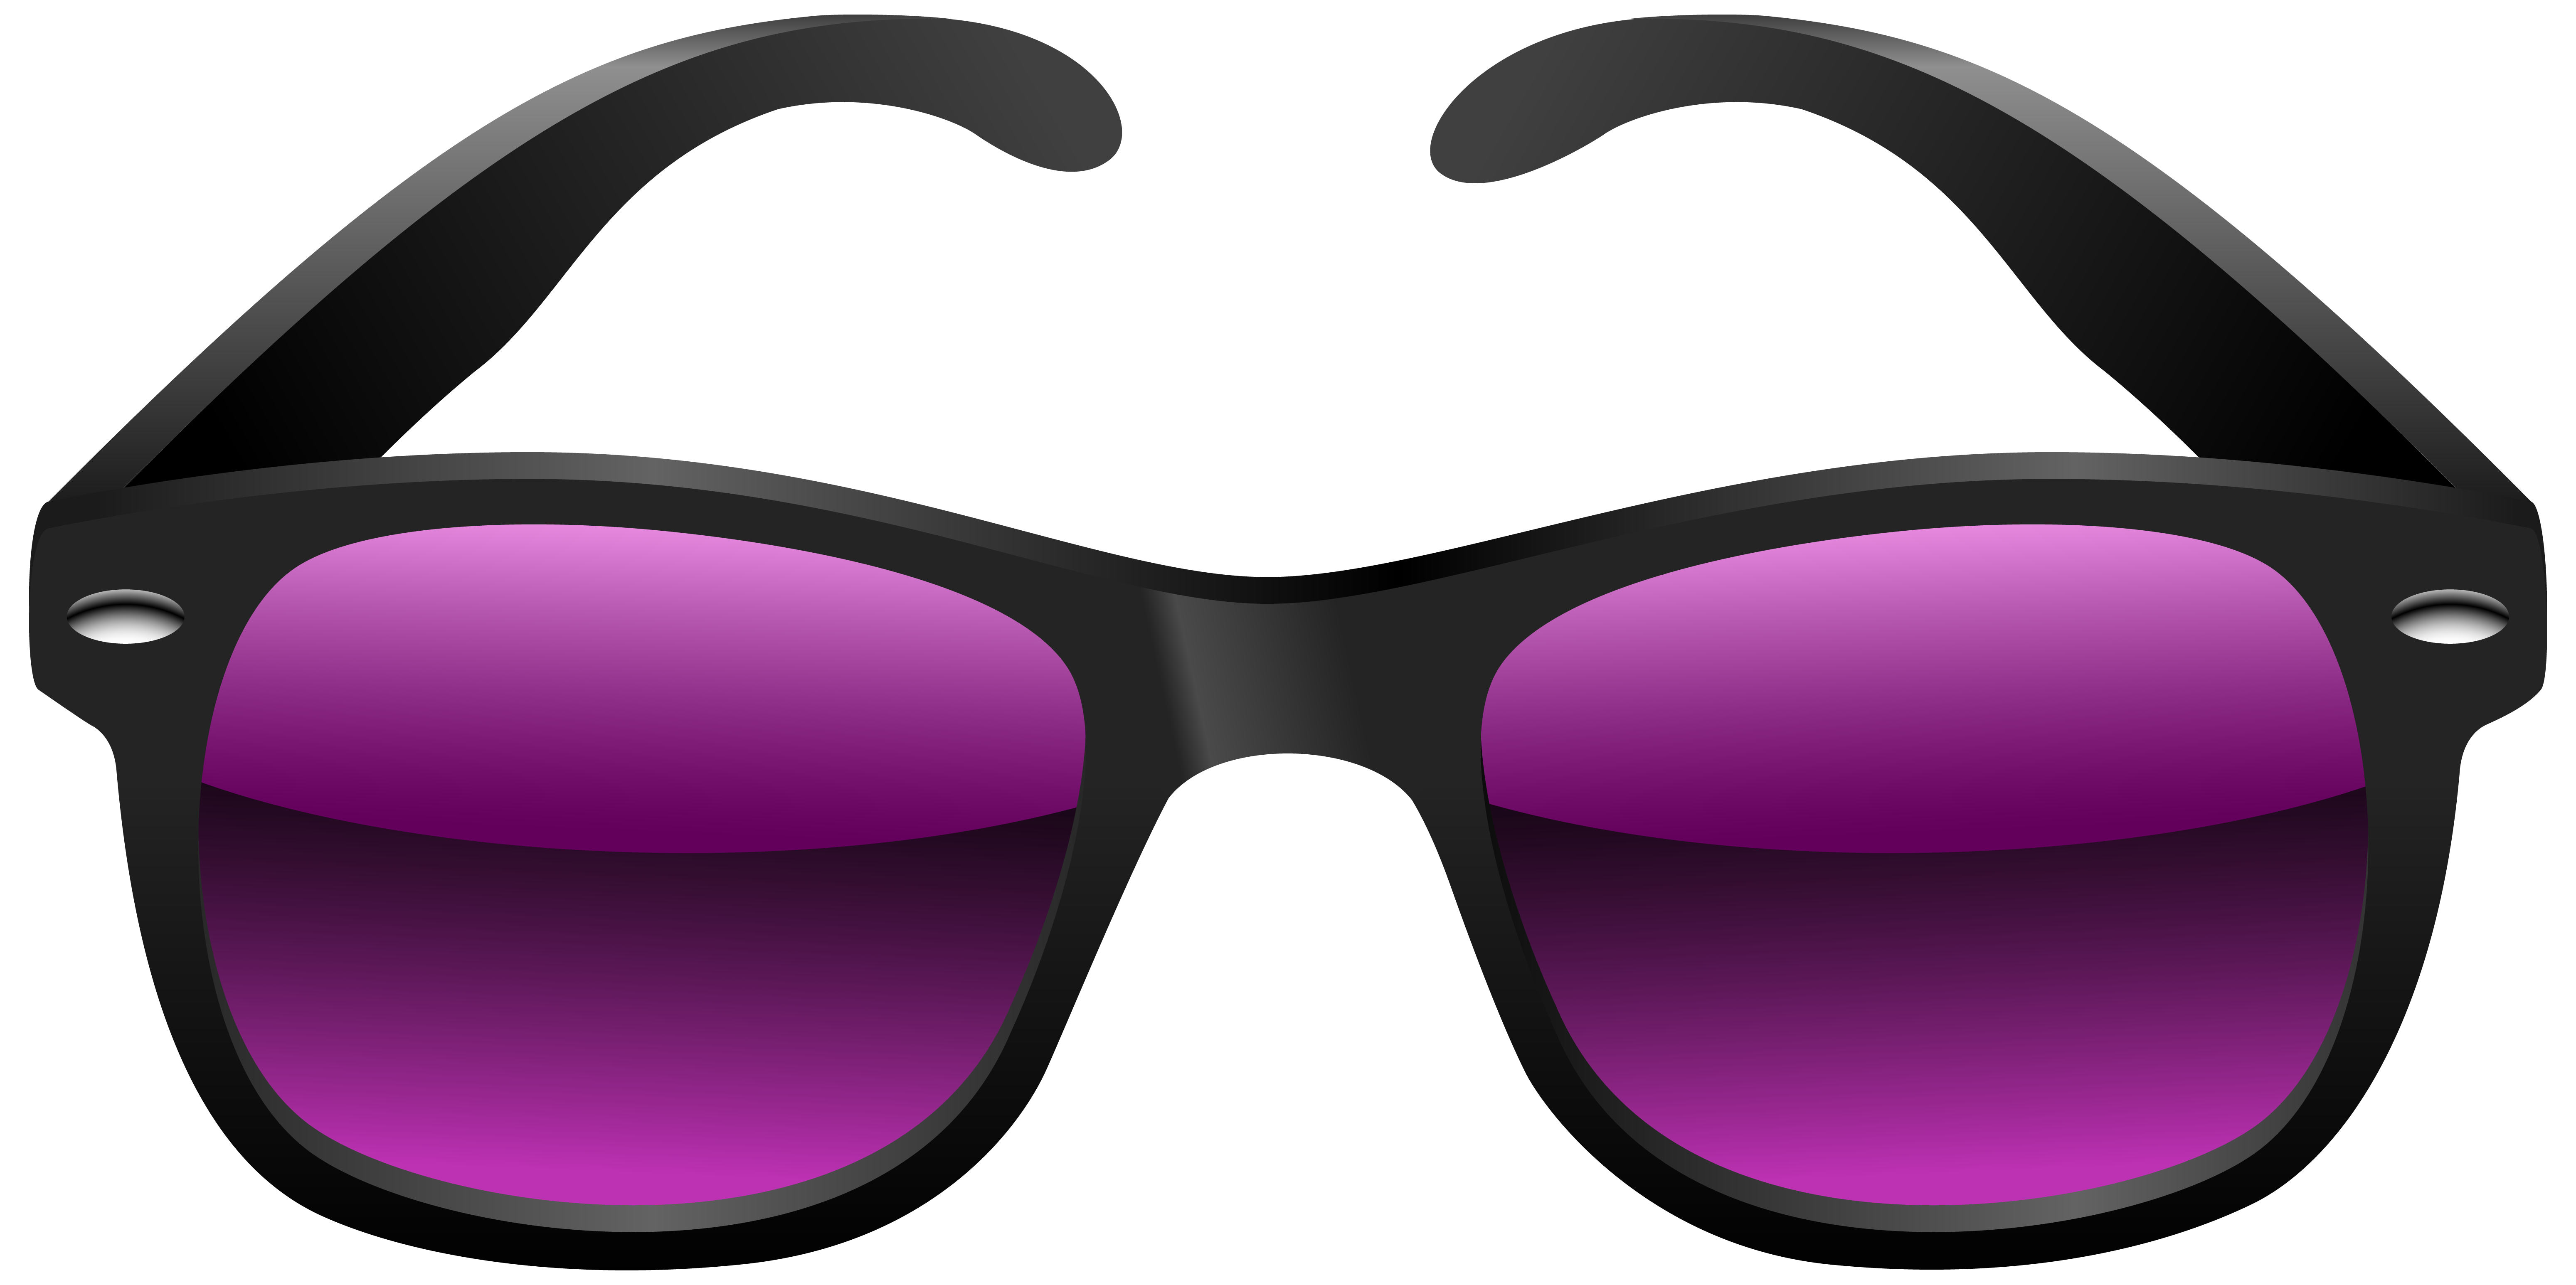 And Black Purple Sunglasses PNG Image High Quality Clipart